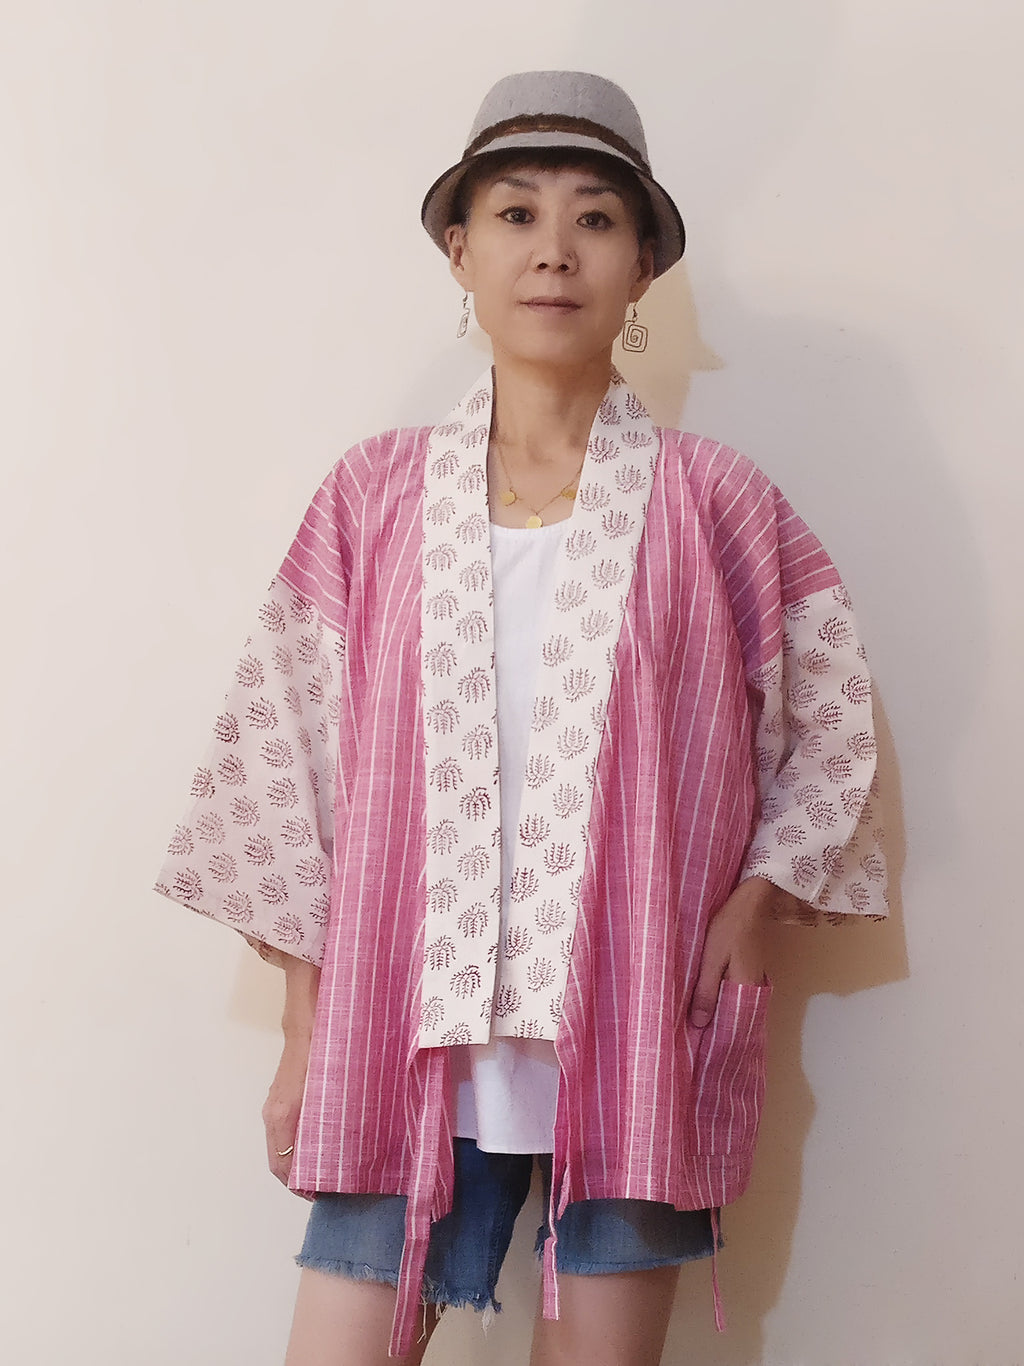 Kimono Jacket with a handloom cotton stripe with a delicate Mul Mul white (and red) cotton print. Very very comfy, light, chic and calming. Buy online.